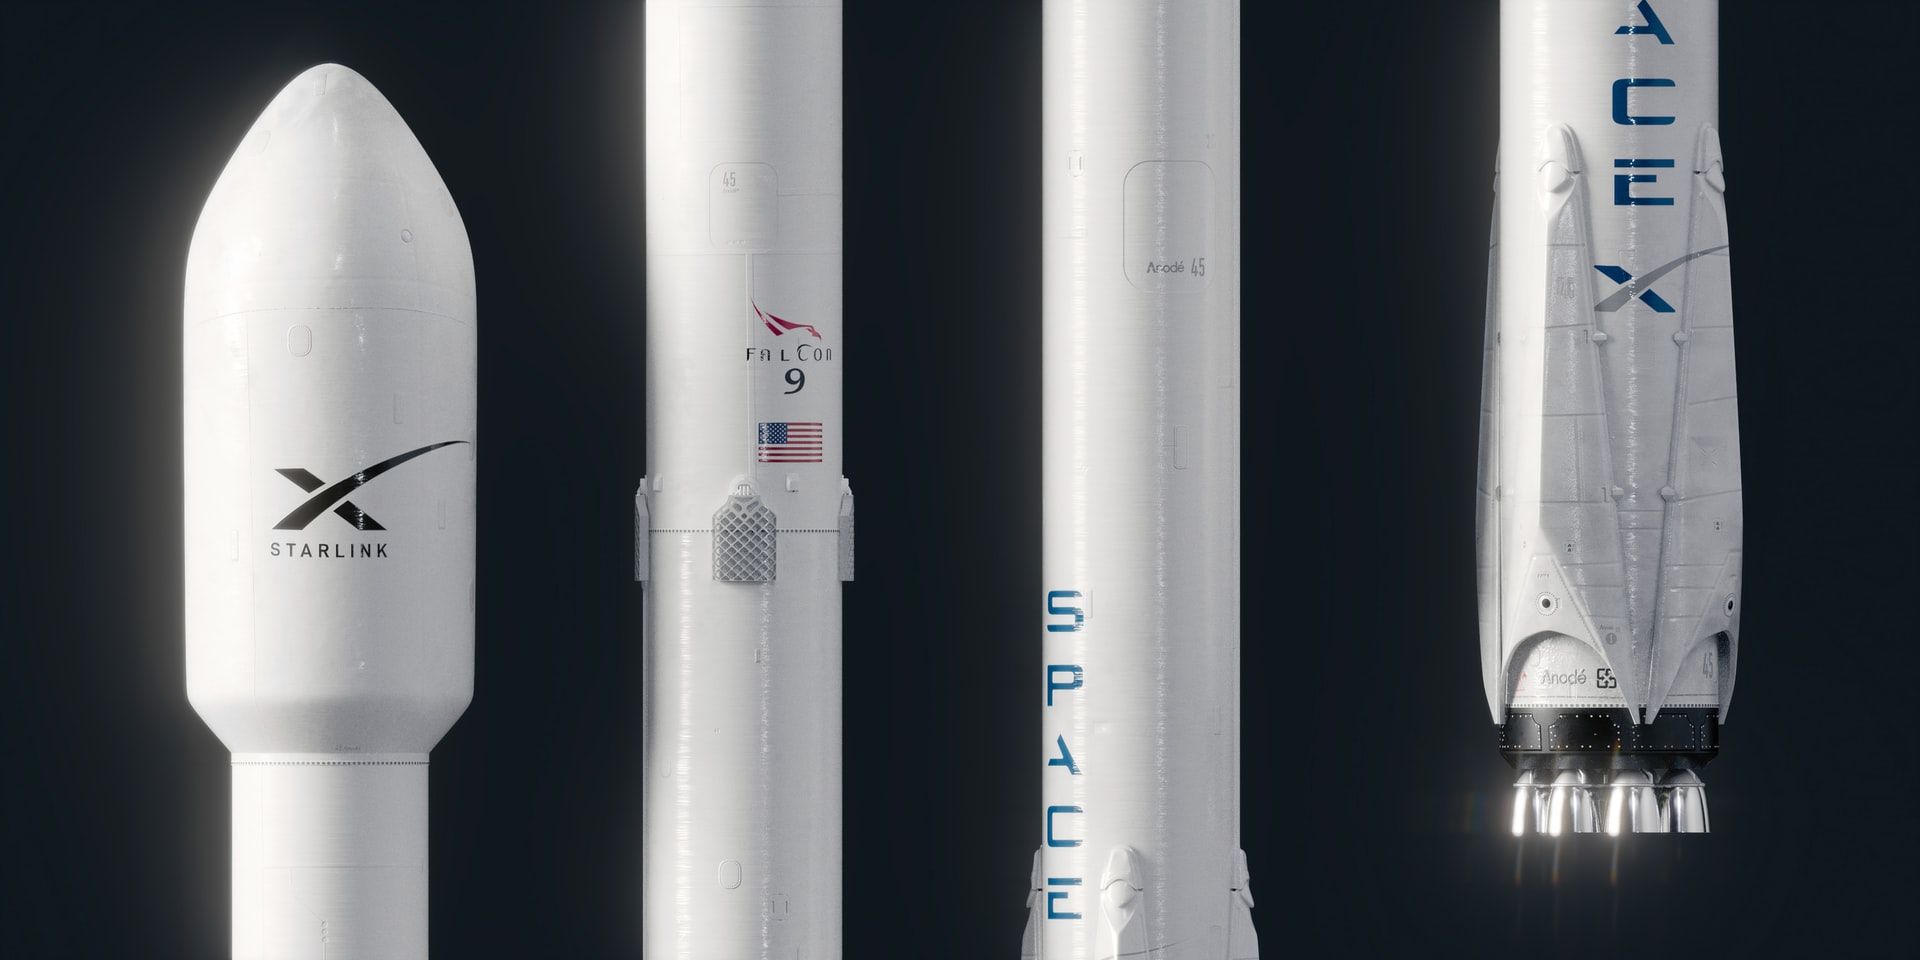 Image showing SpaceX rockets and Starlink satellite